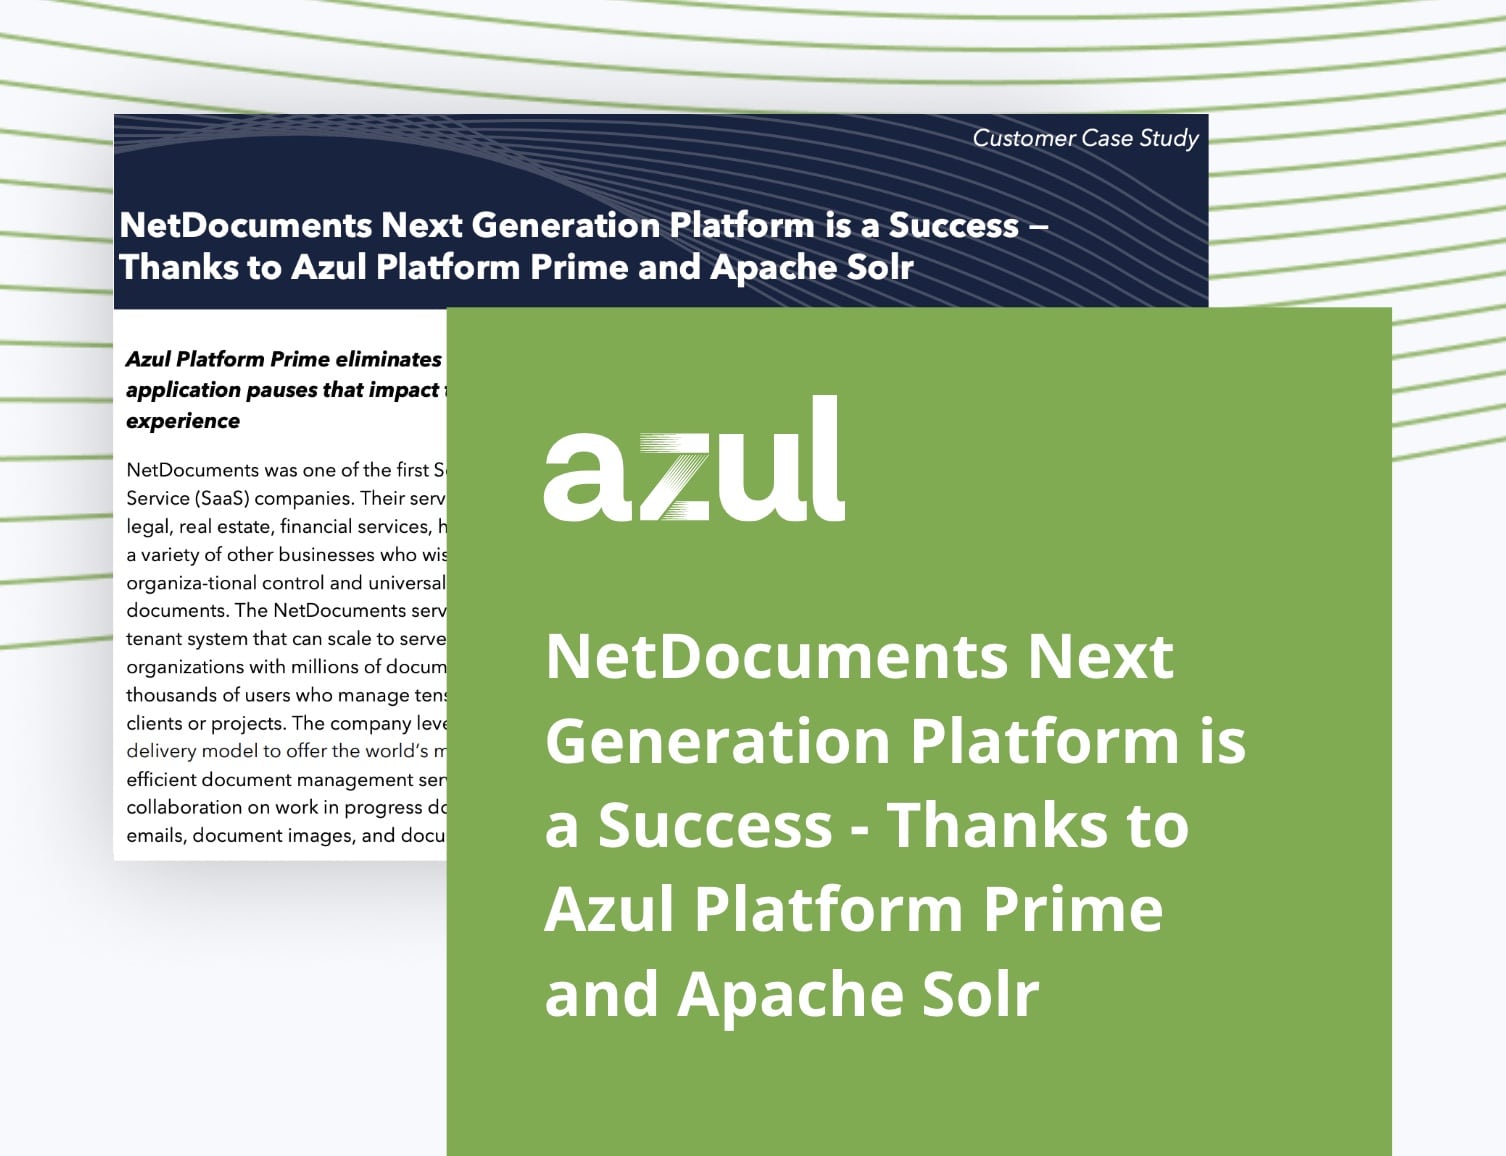 NetDocuments Next Generation Platform is a Success - Thanks to Azul Platform Prime and Apache Solr